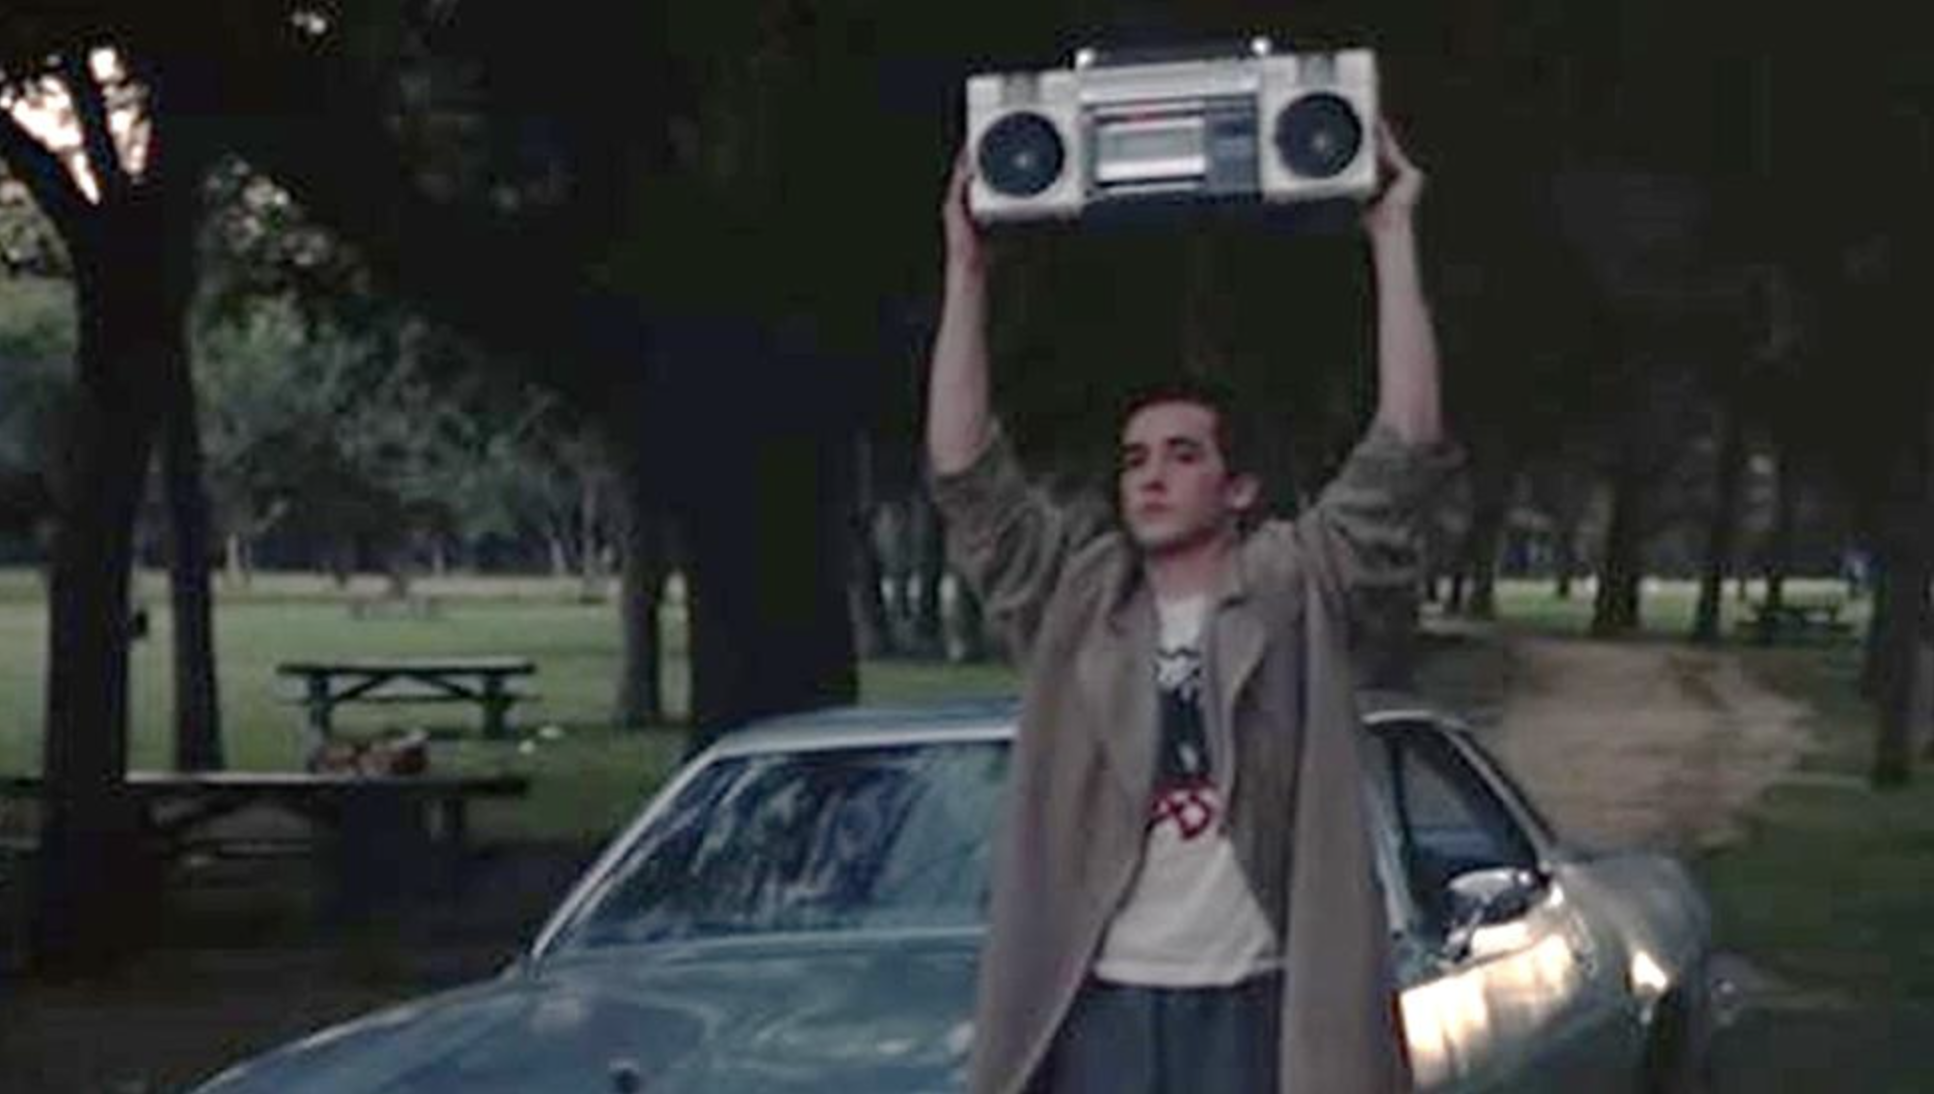 John Cusack standing outside a window holding a stereo system in a scene from Say Anything